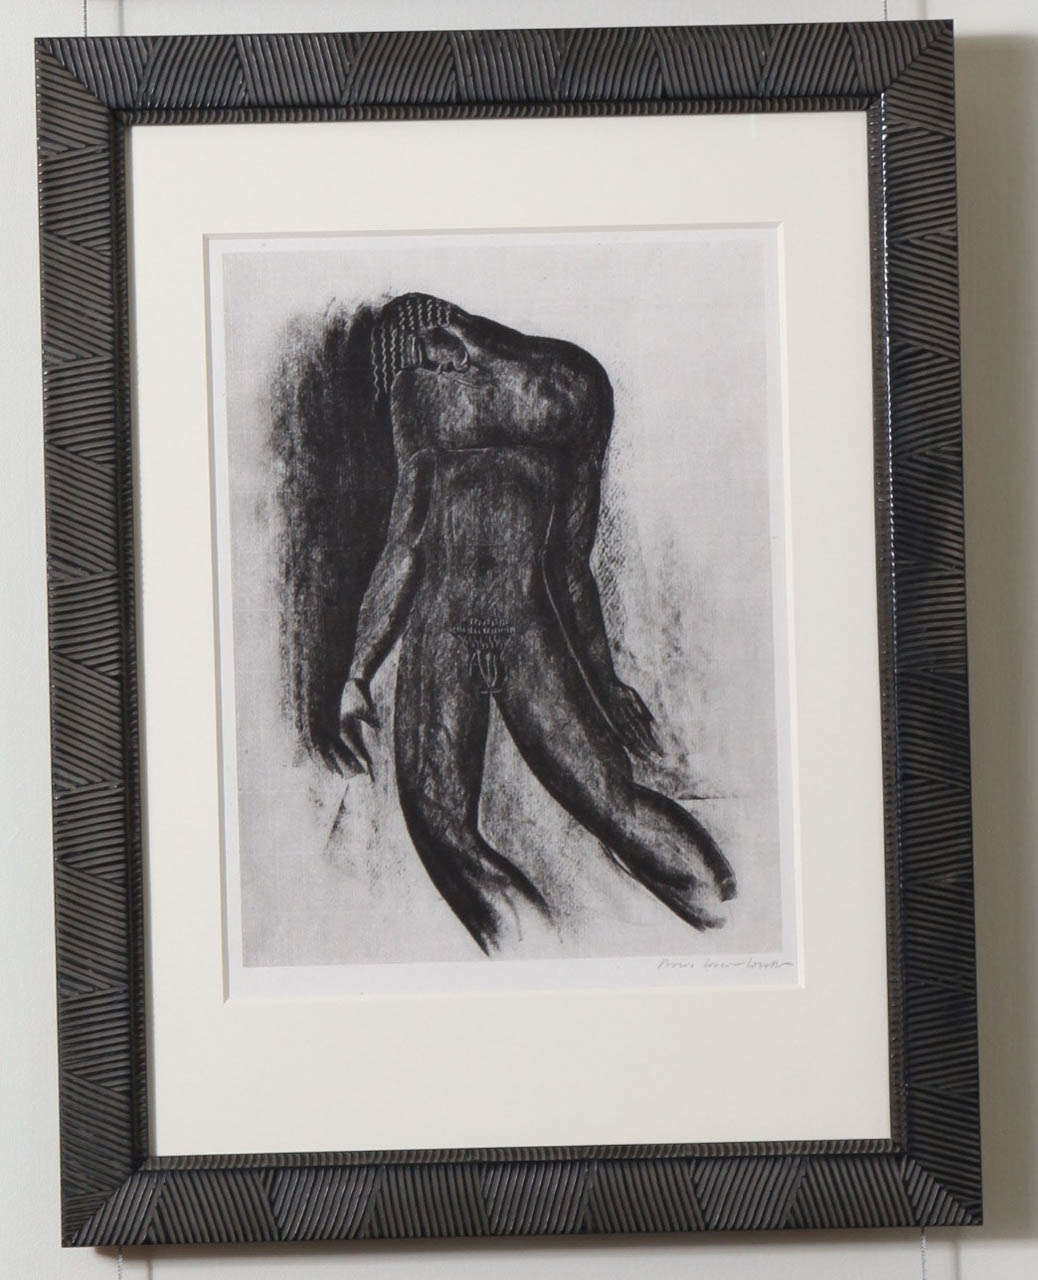 Boris Lovet-Lorski 'Untitled' from Volume 2 Lithograph For Sale 2